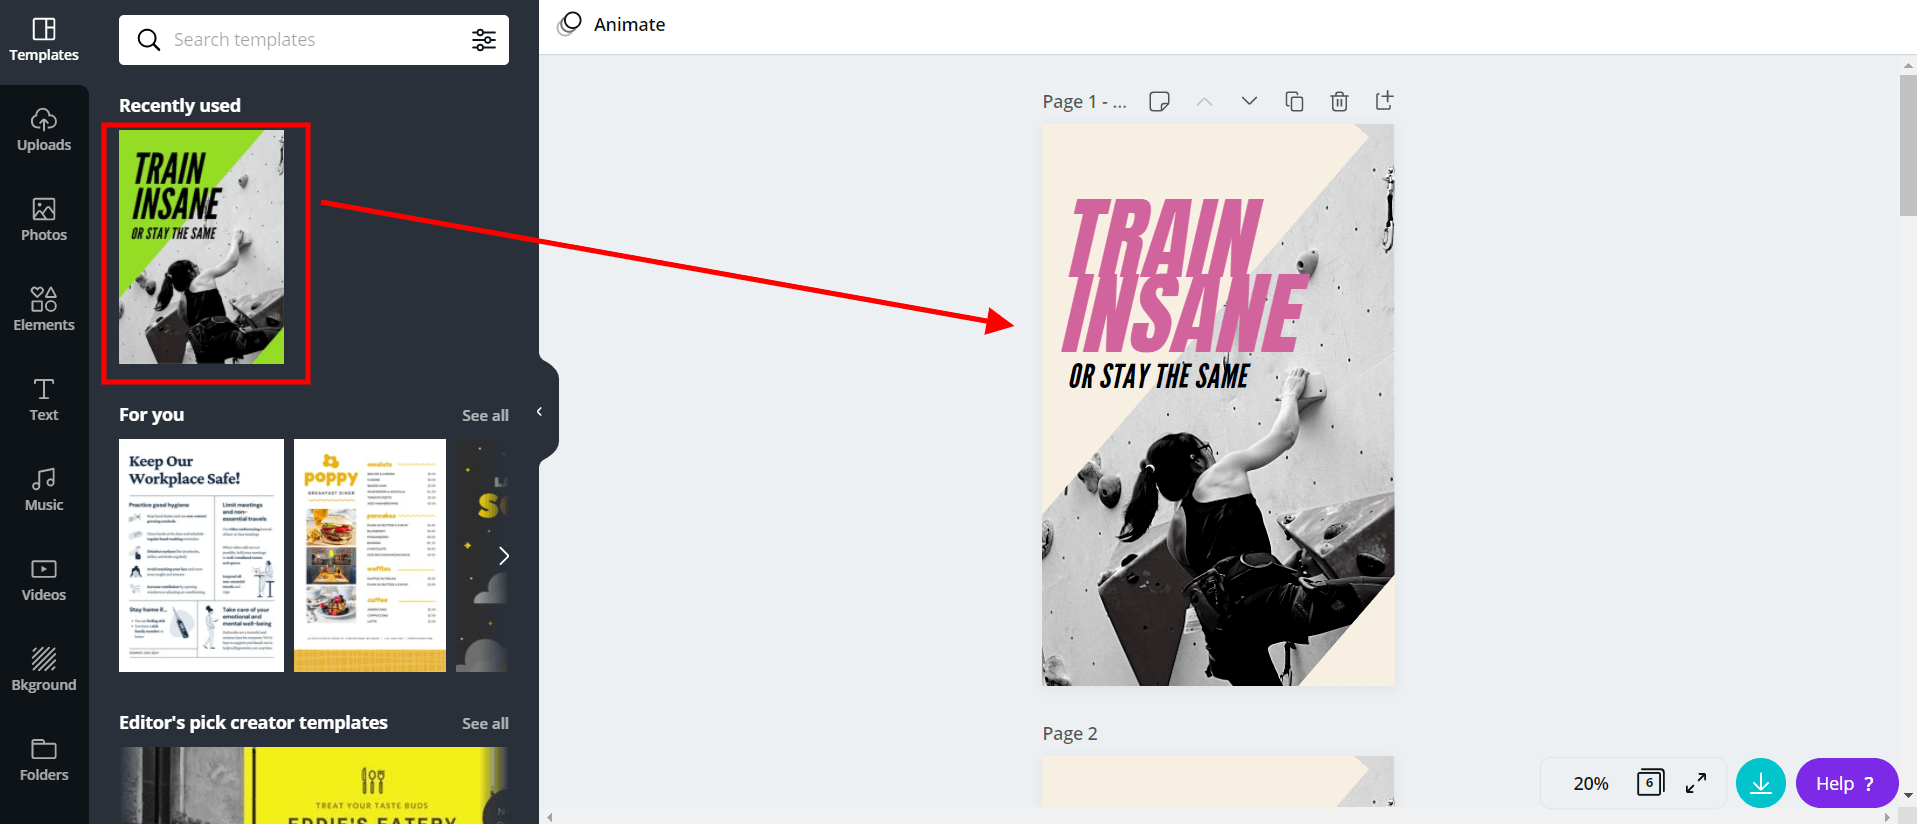 A screenshot showing how to create an ebook in Canva.